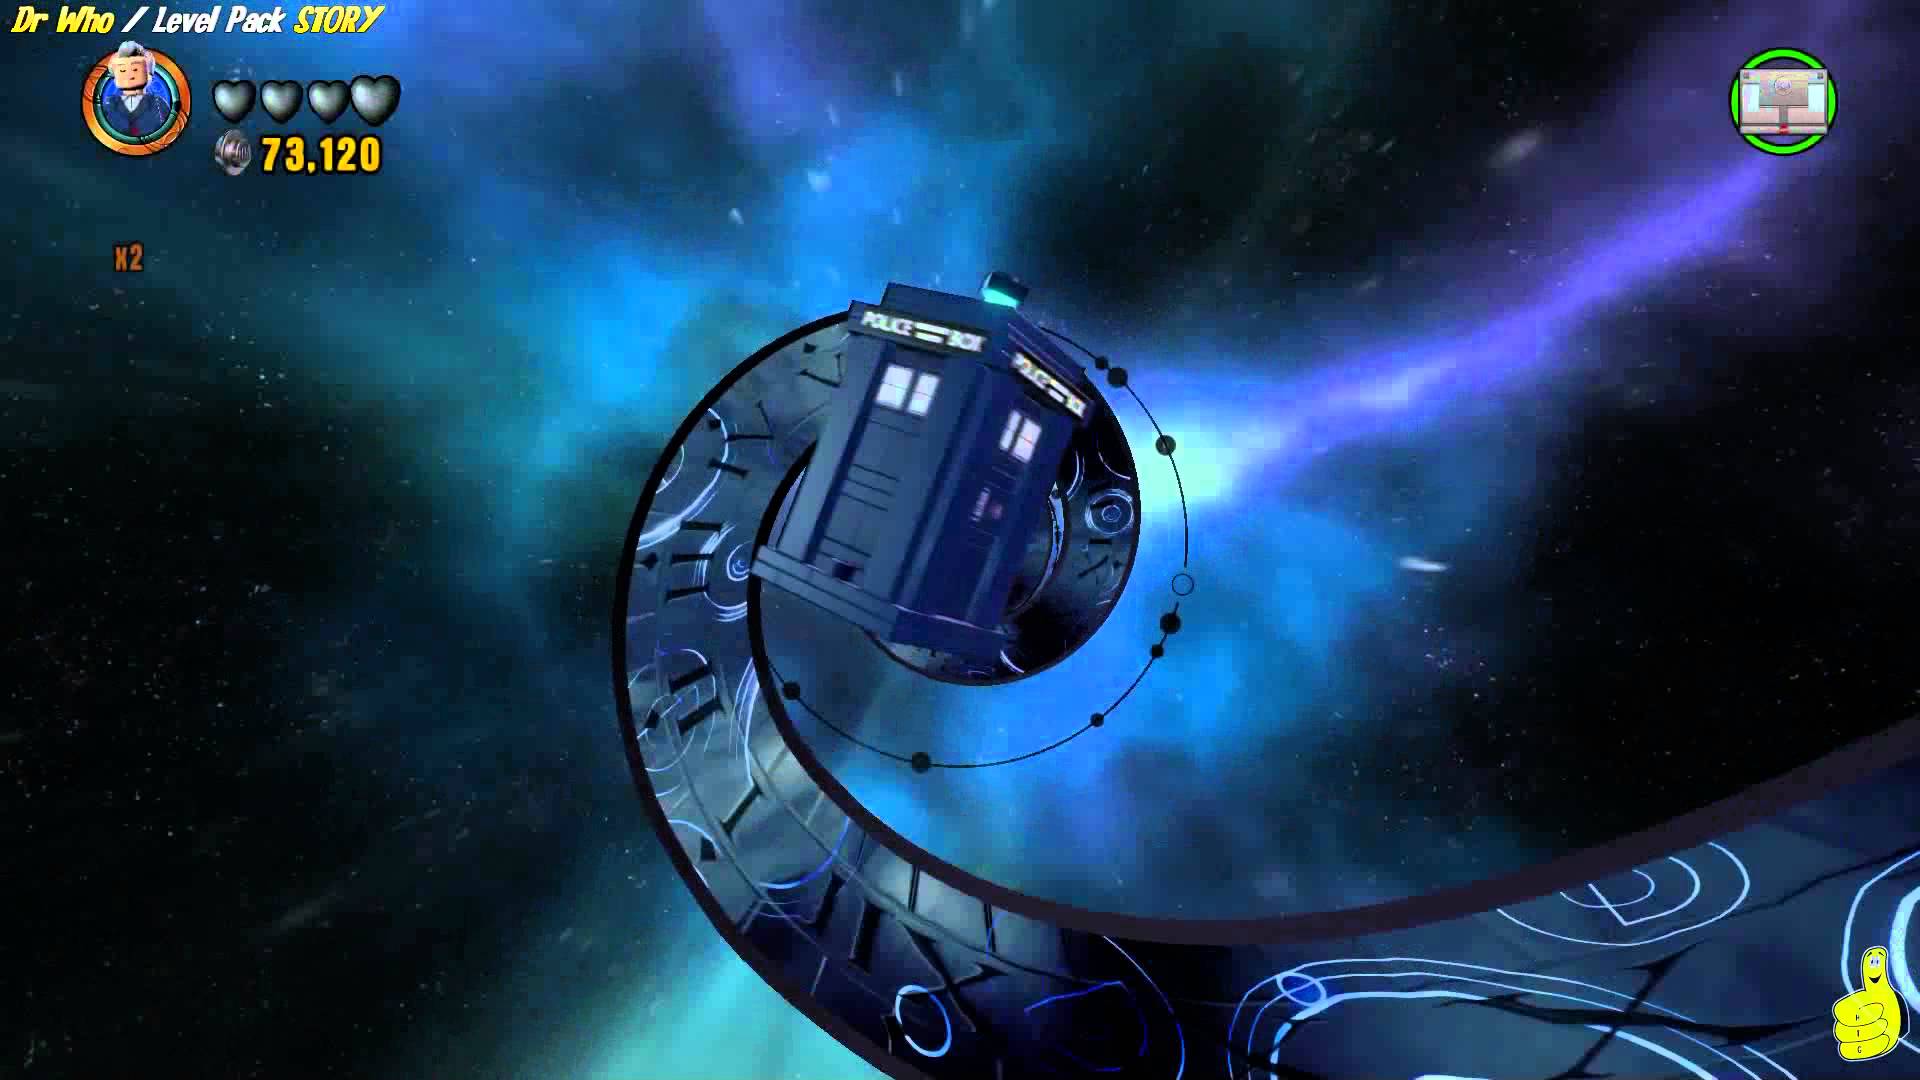 Lego Dimensions: Dr Who Level Pack STORY/Our Destiny is in the stars Trophy/Achievement – HTG